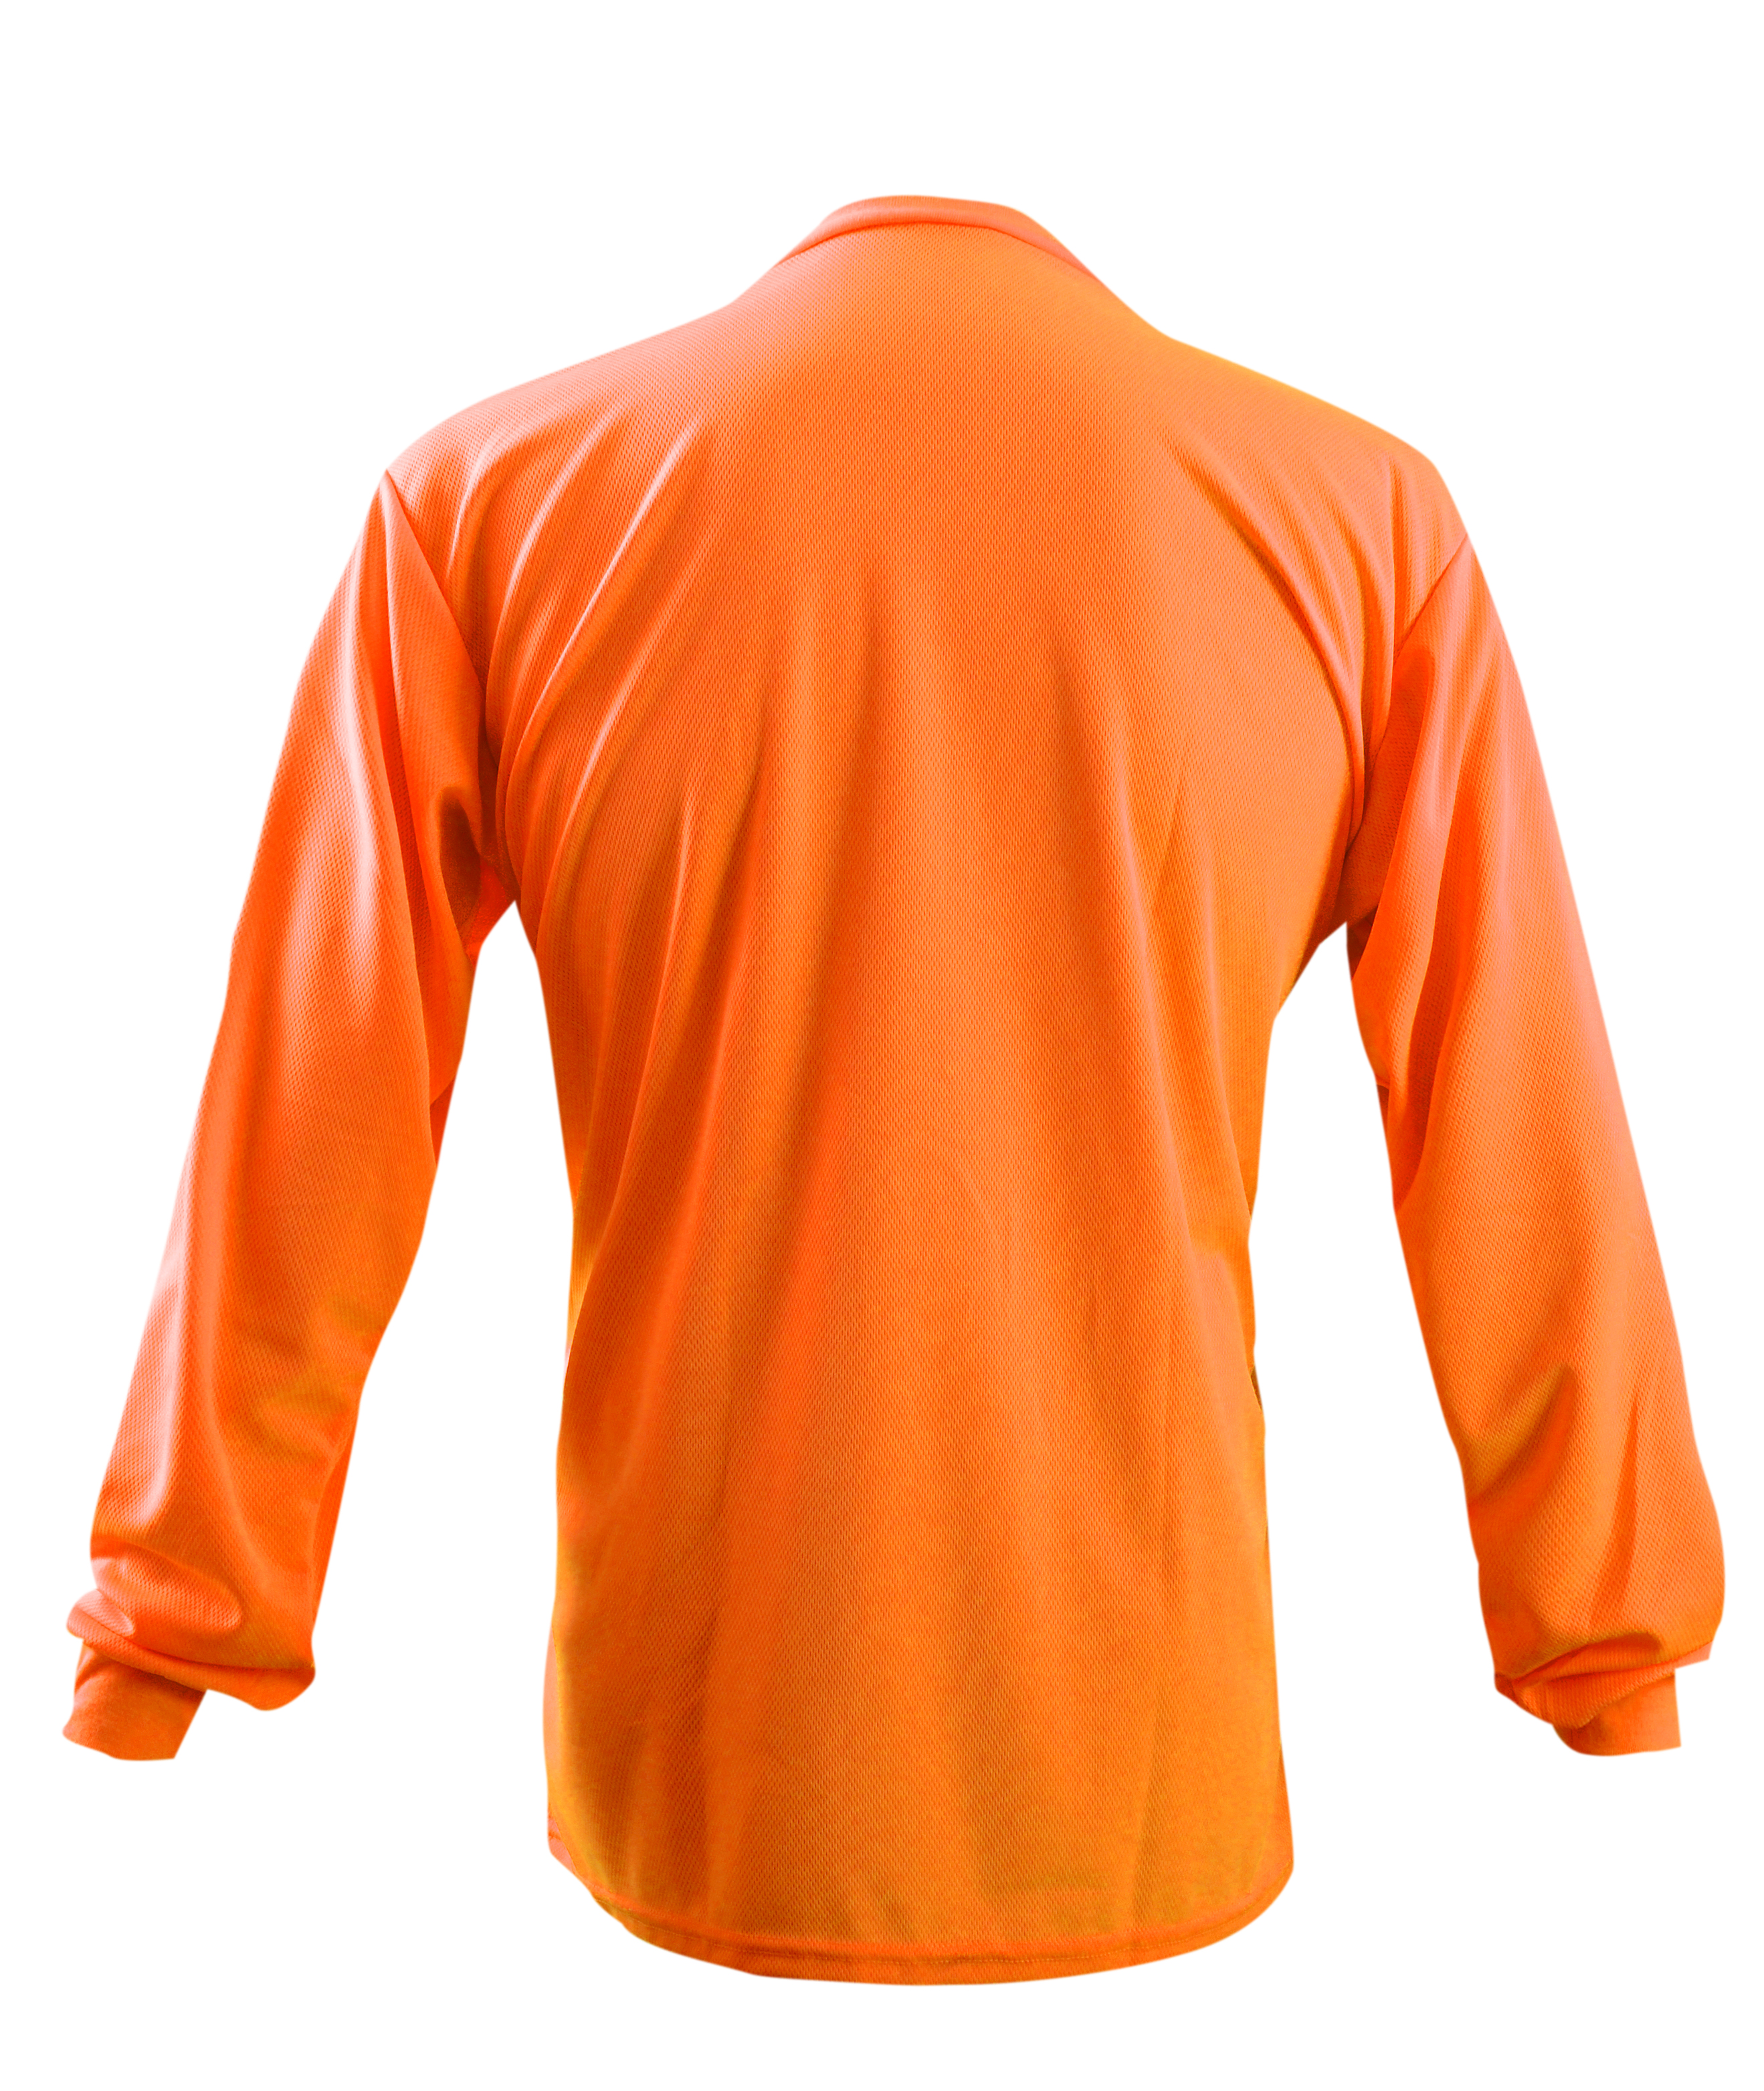 Picture of Occunomix LUX-XLSPB NON-ANSI LONG SLEEVE WICKING BIRDSEYE T-SHIRT w/POCKET